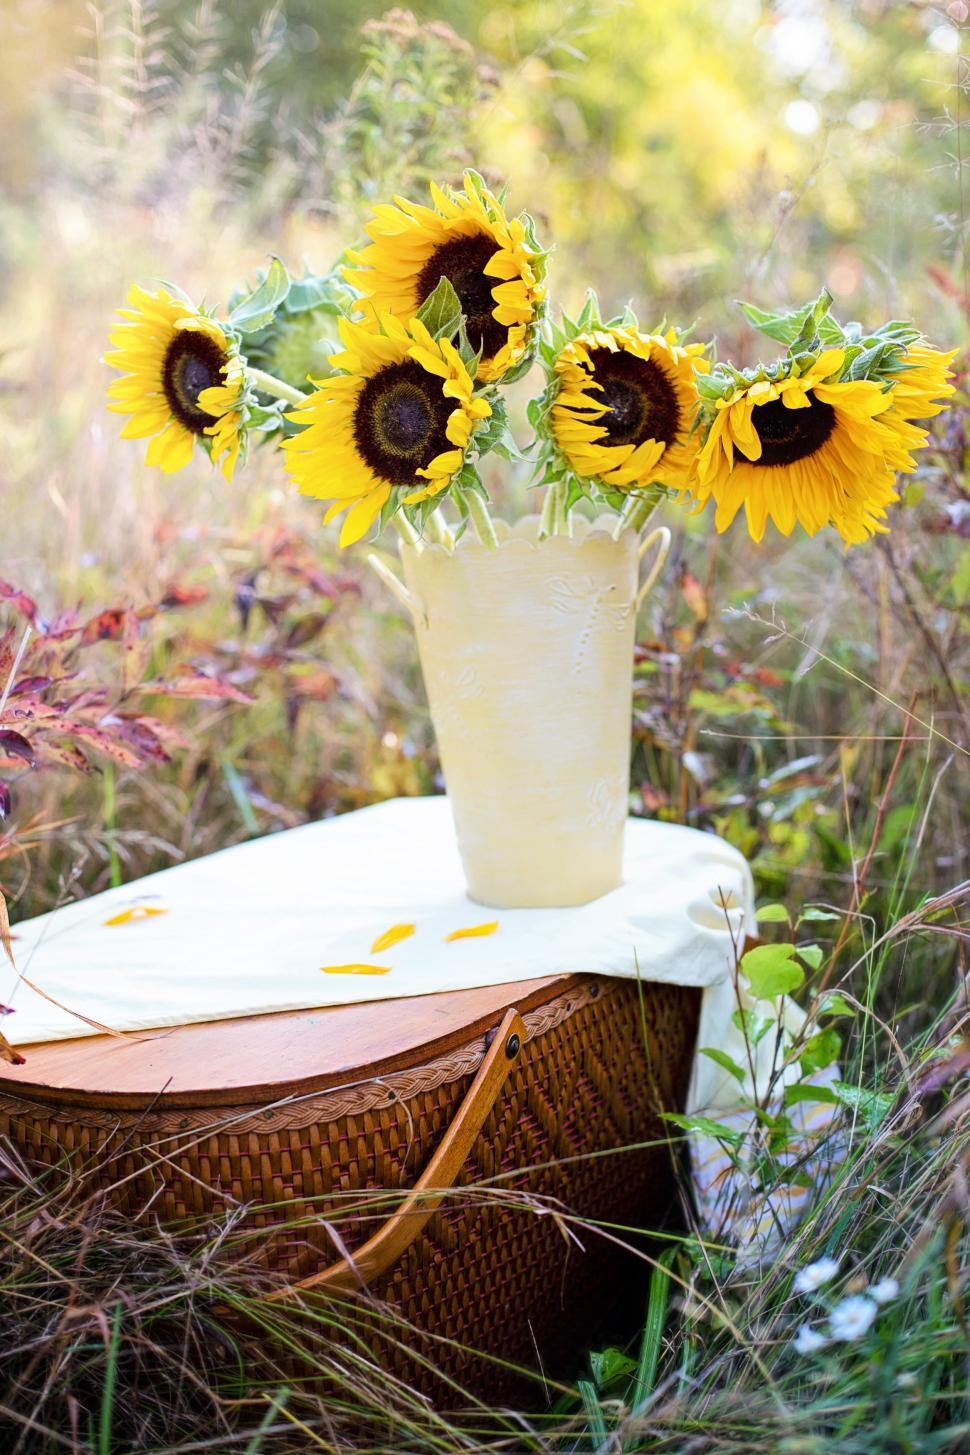 Free Image of Picnic Basket and Sunflowers  